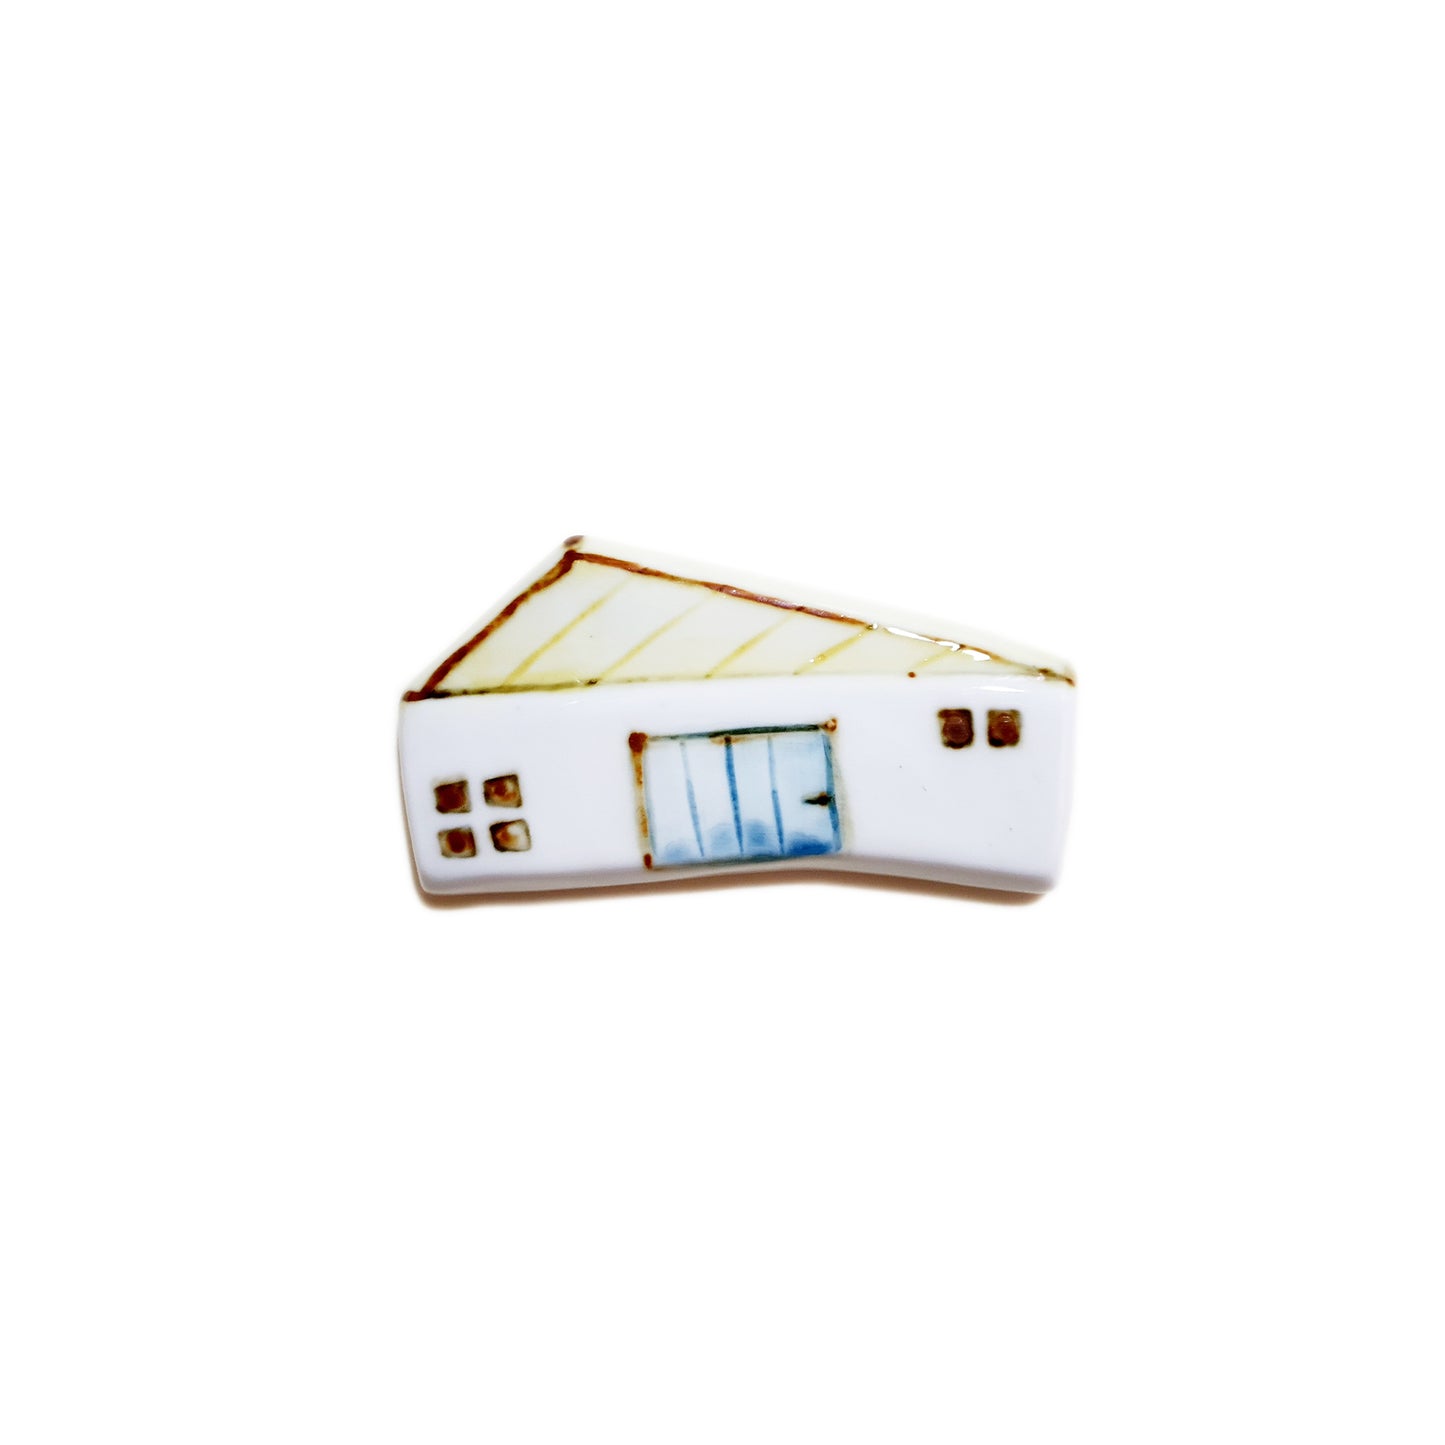 House Chopstick Rest (Yellow Roof)